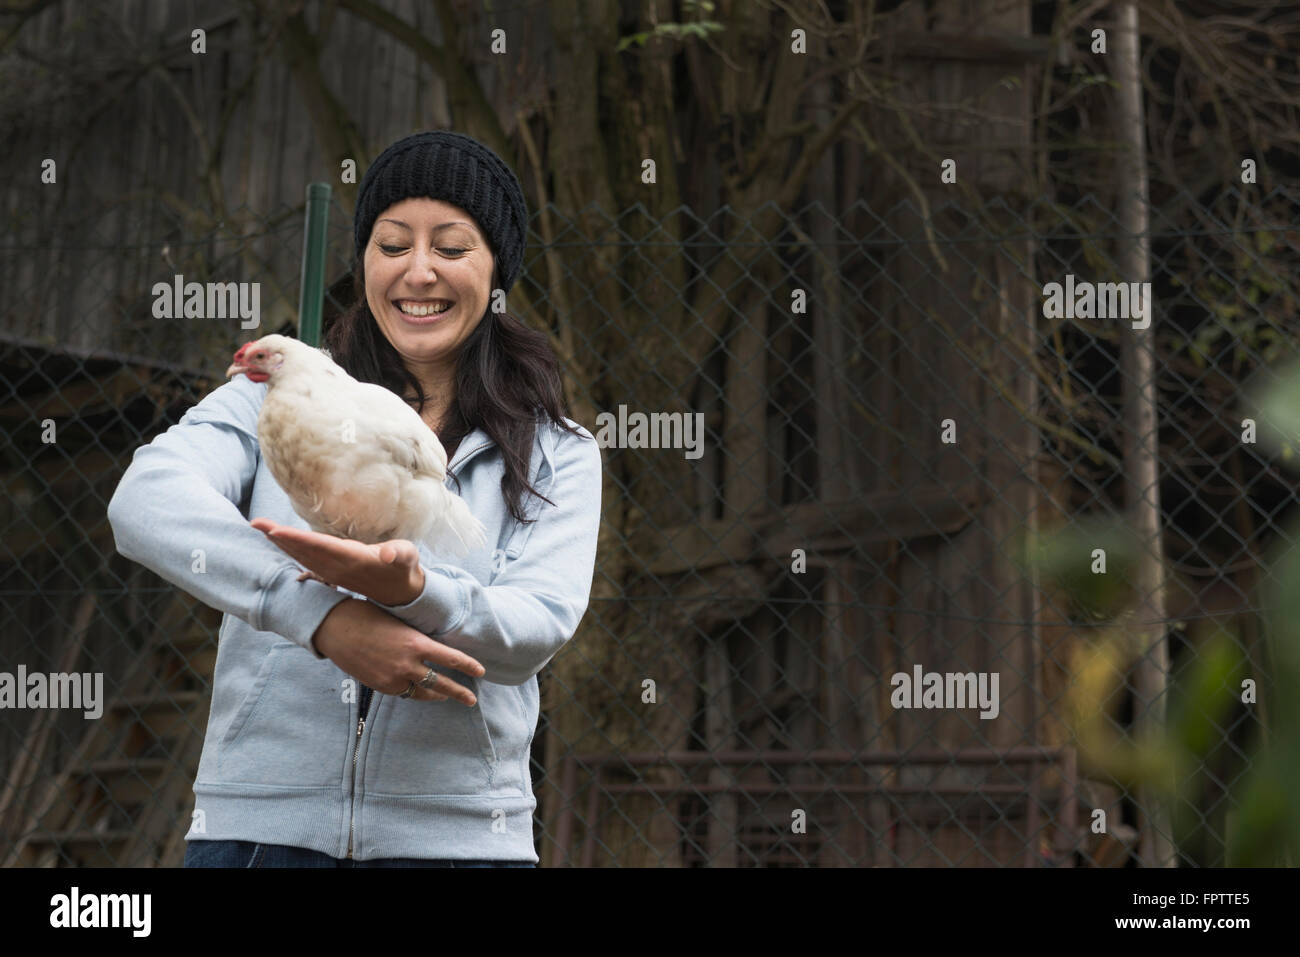 Farmer woman with white chicken bird and smiling in farm, Bavaria, Germany Stock Photo